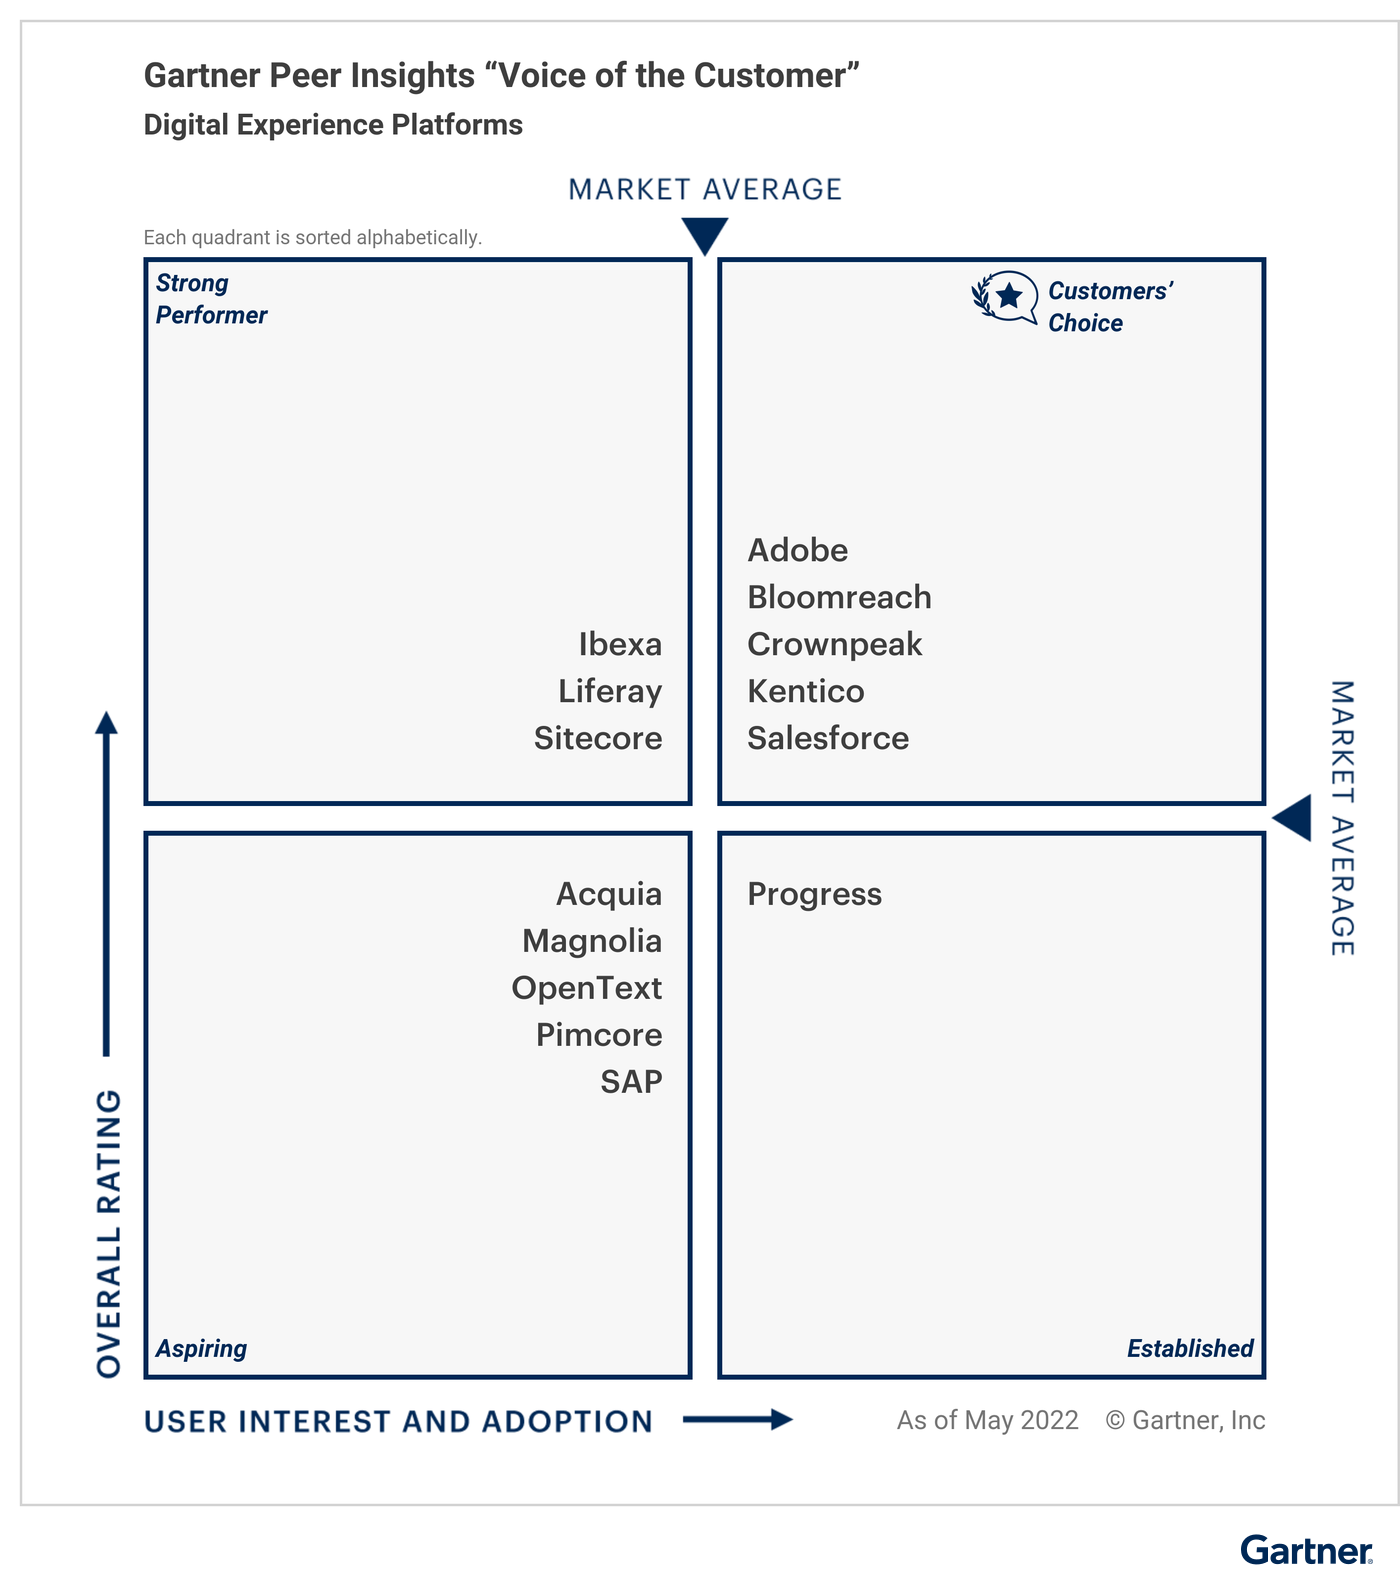 Bloomreach as Customers' Choice in the Gartner Peer Insights "Voice of the Customer" Quadrant under the Digital Experience Platforms category.